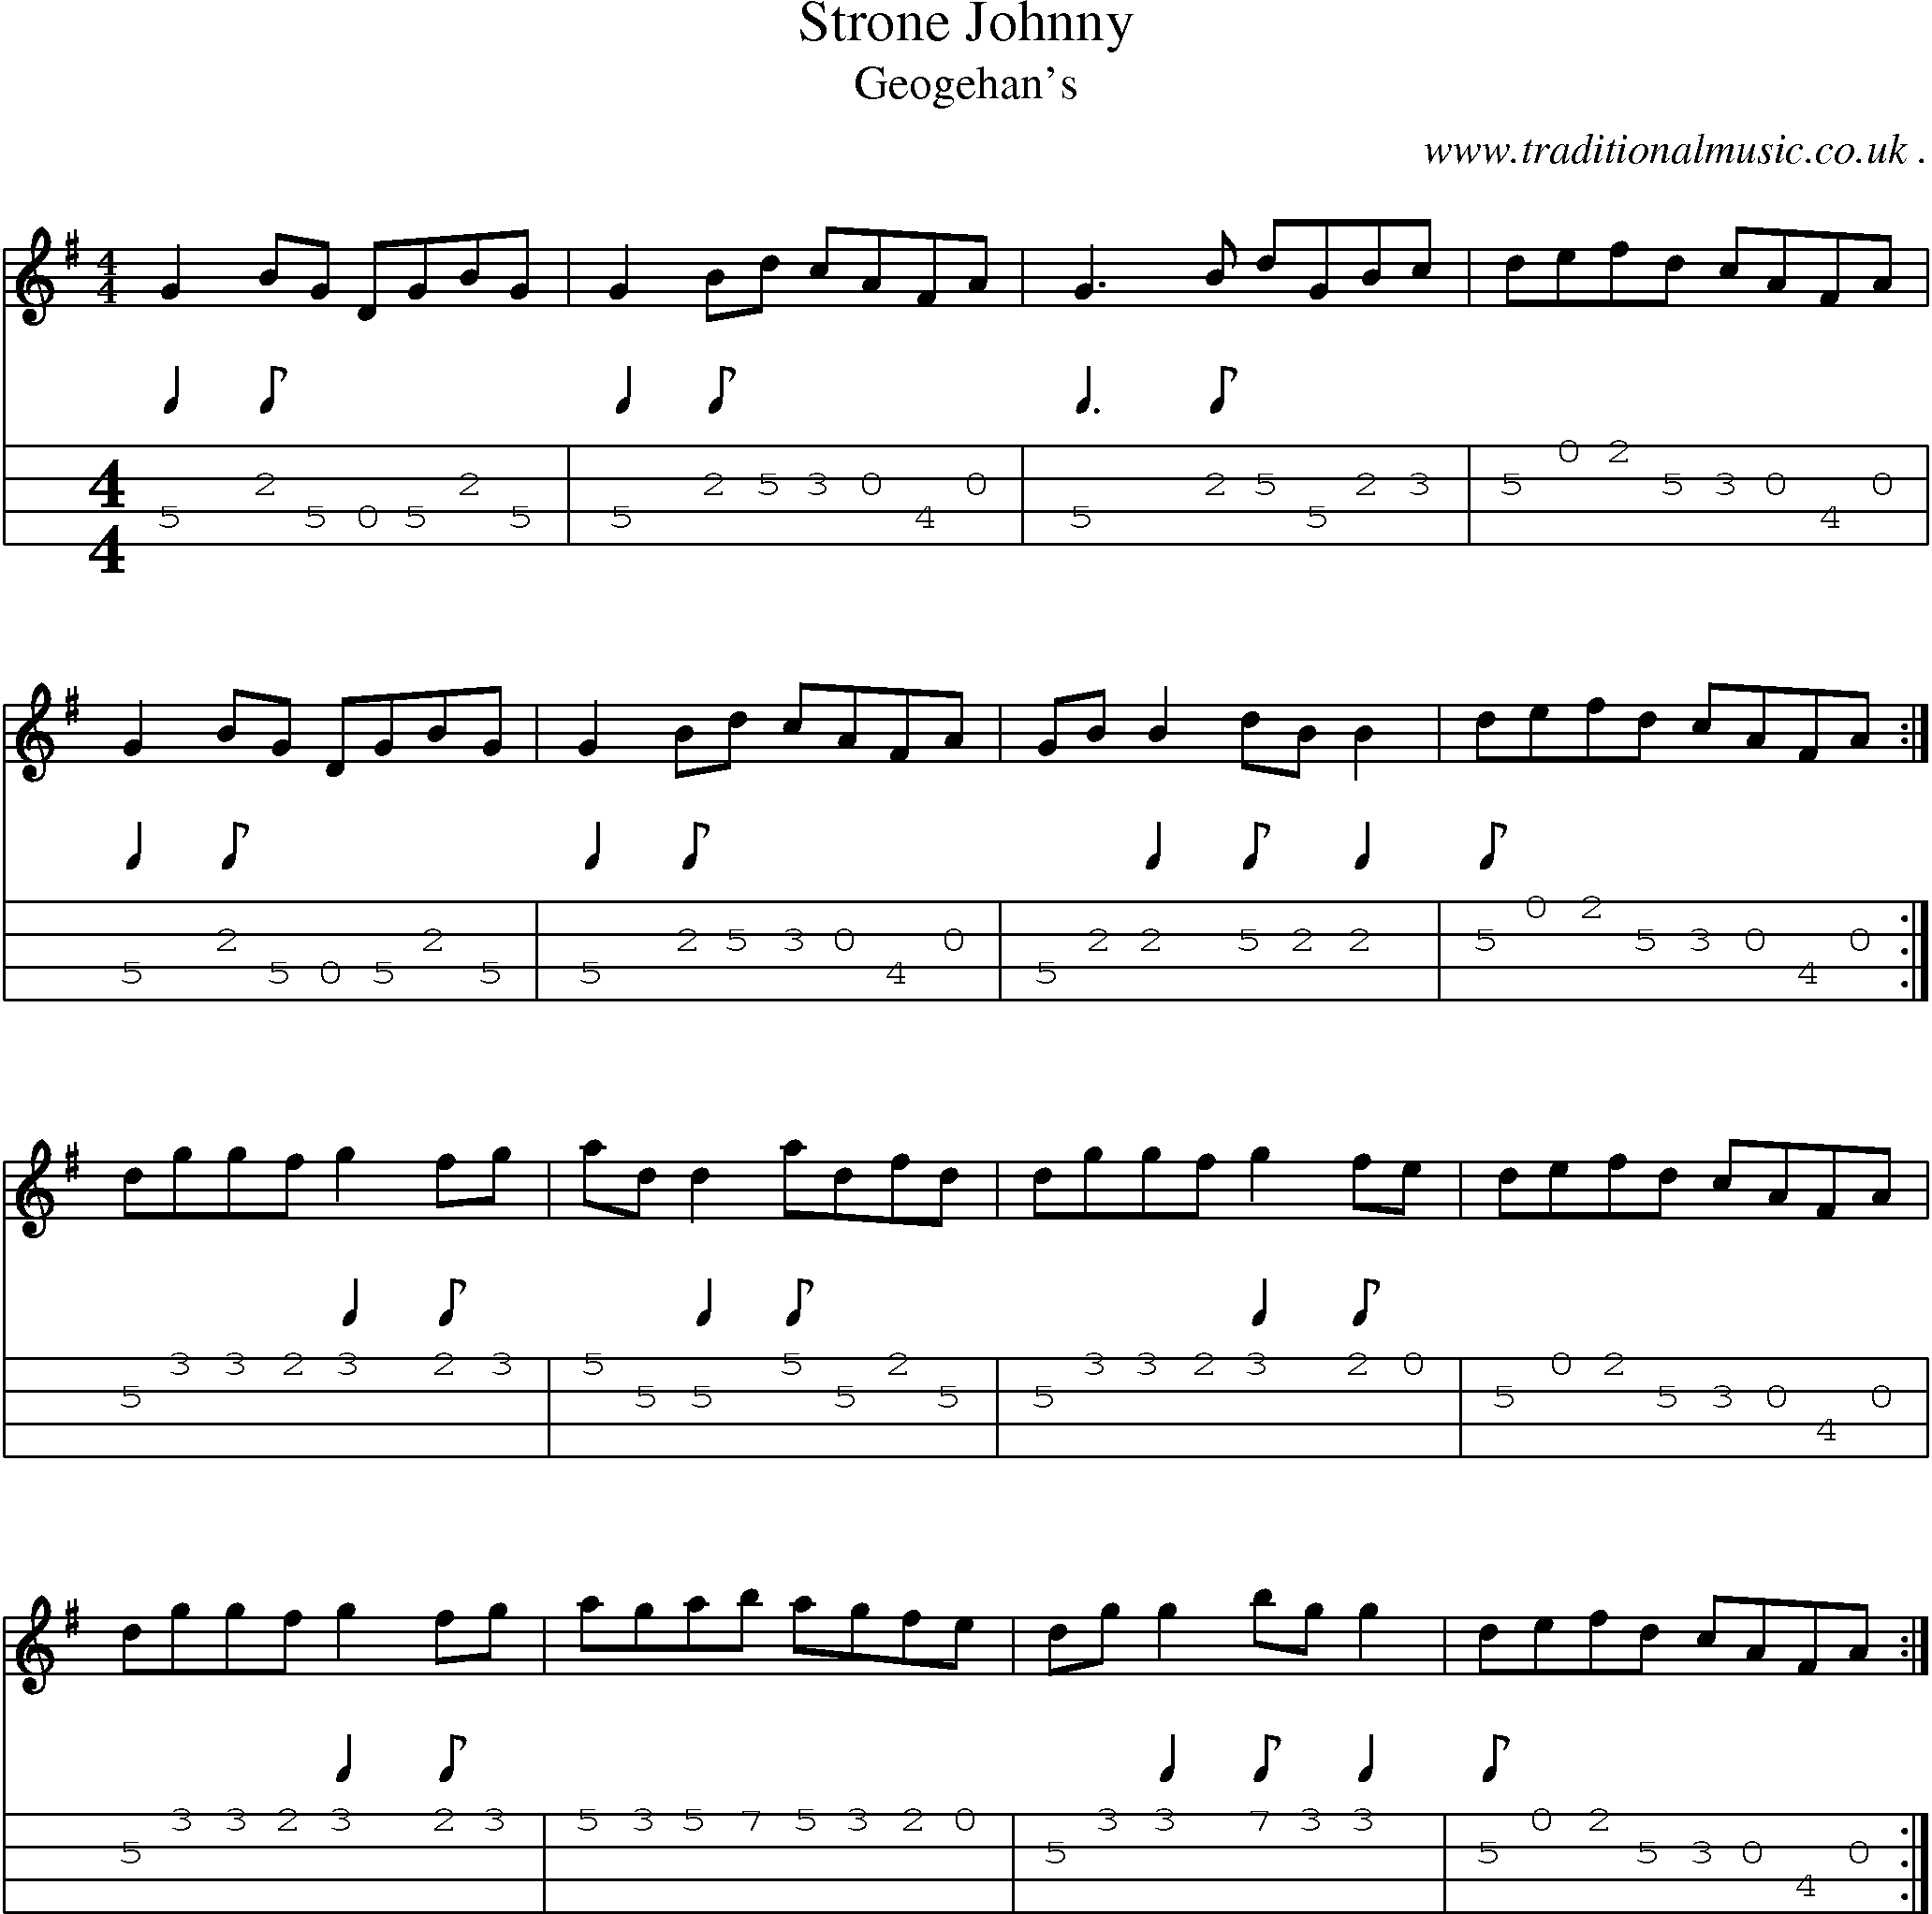 Sheet-Music and Mandolin Tabs for Strone Johnny